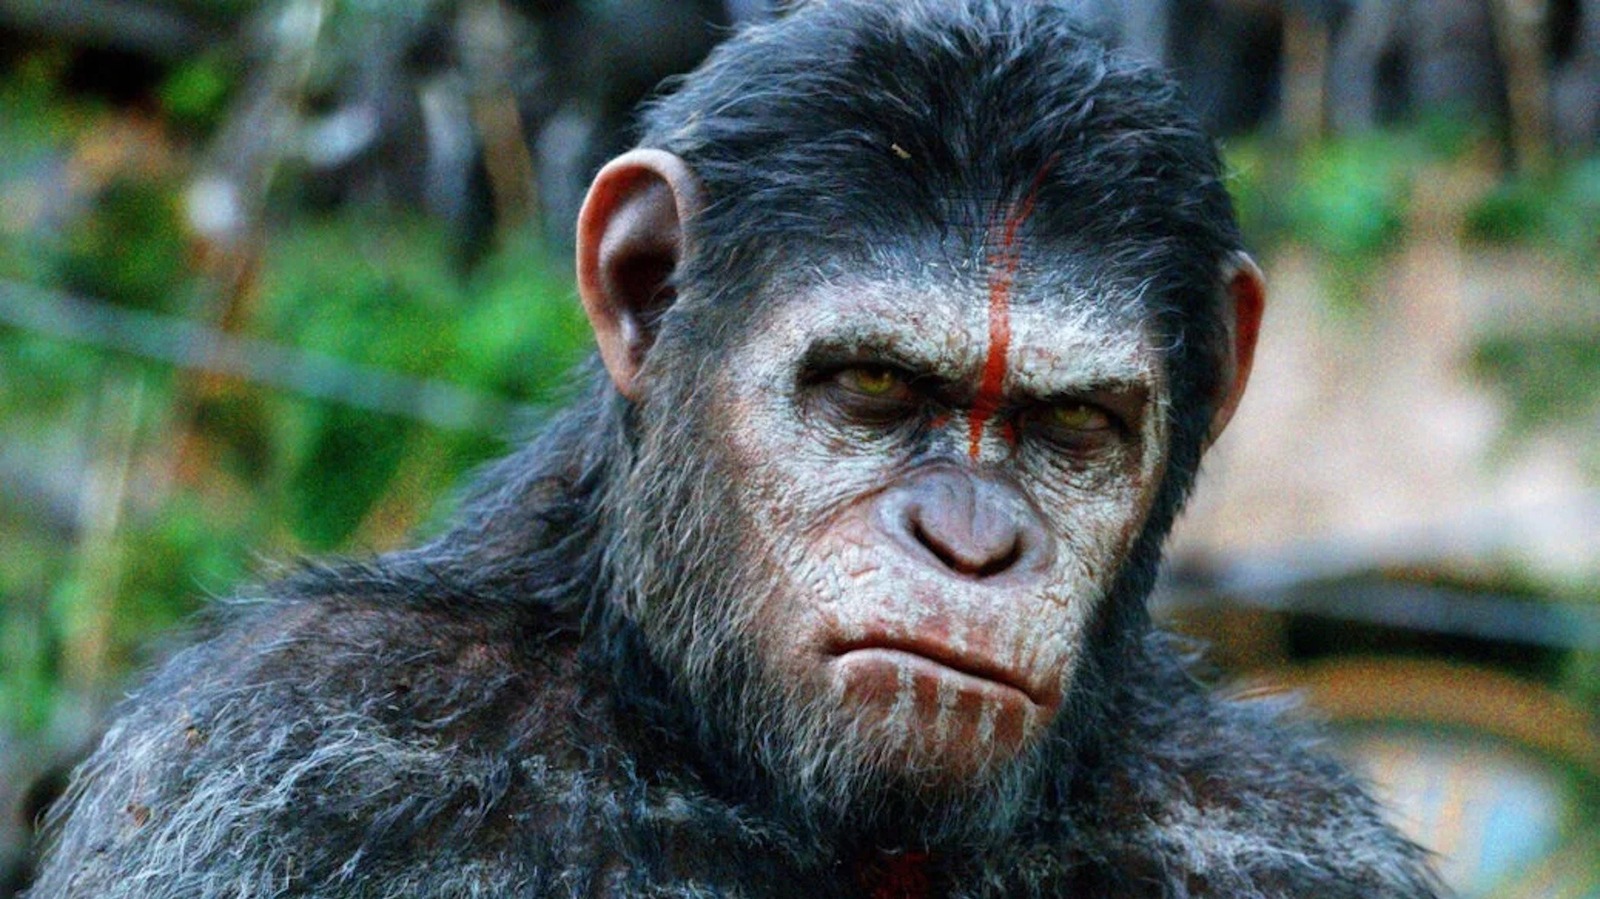 #New Planet Of The Apes Installment Finds Andy Serkis’ Successor In The Stand’s Owen Teague